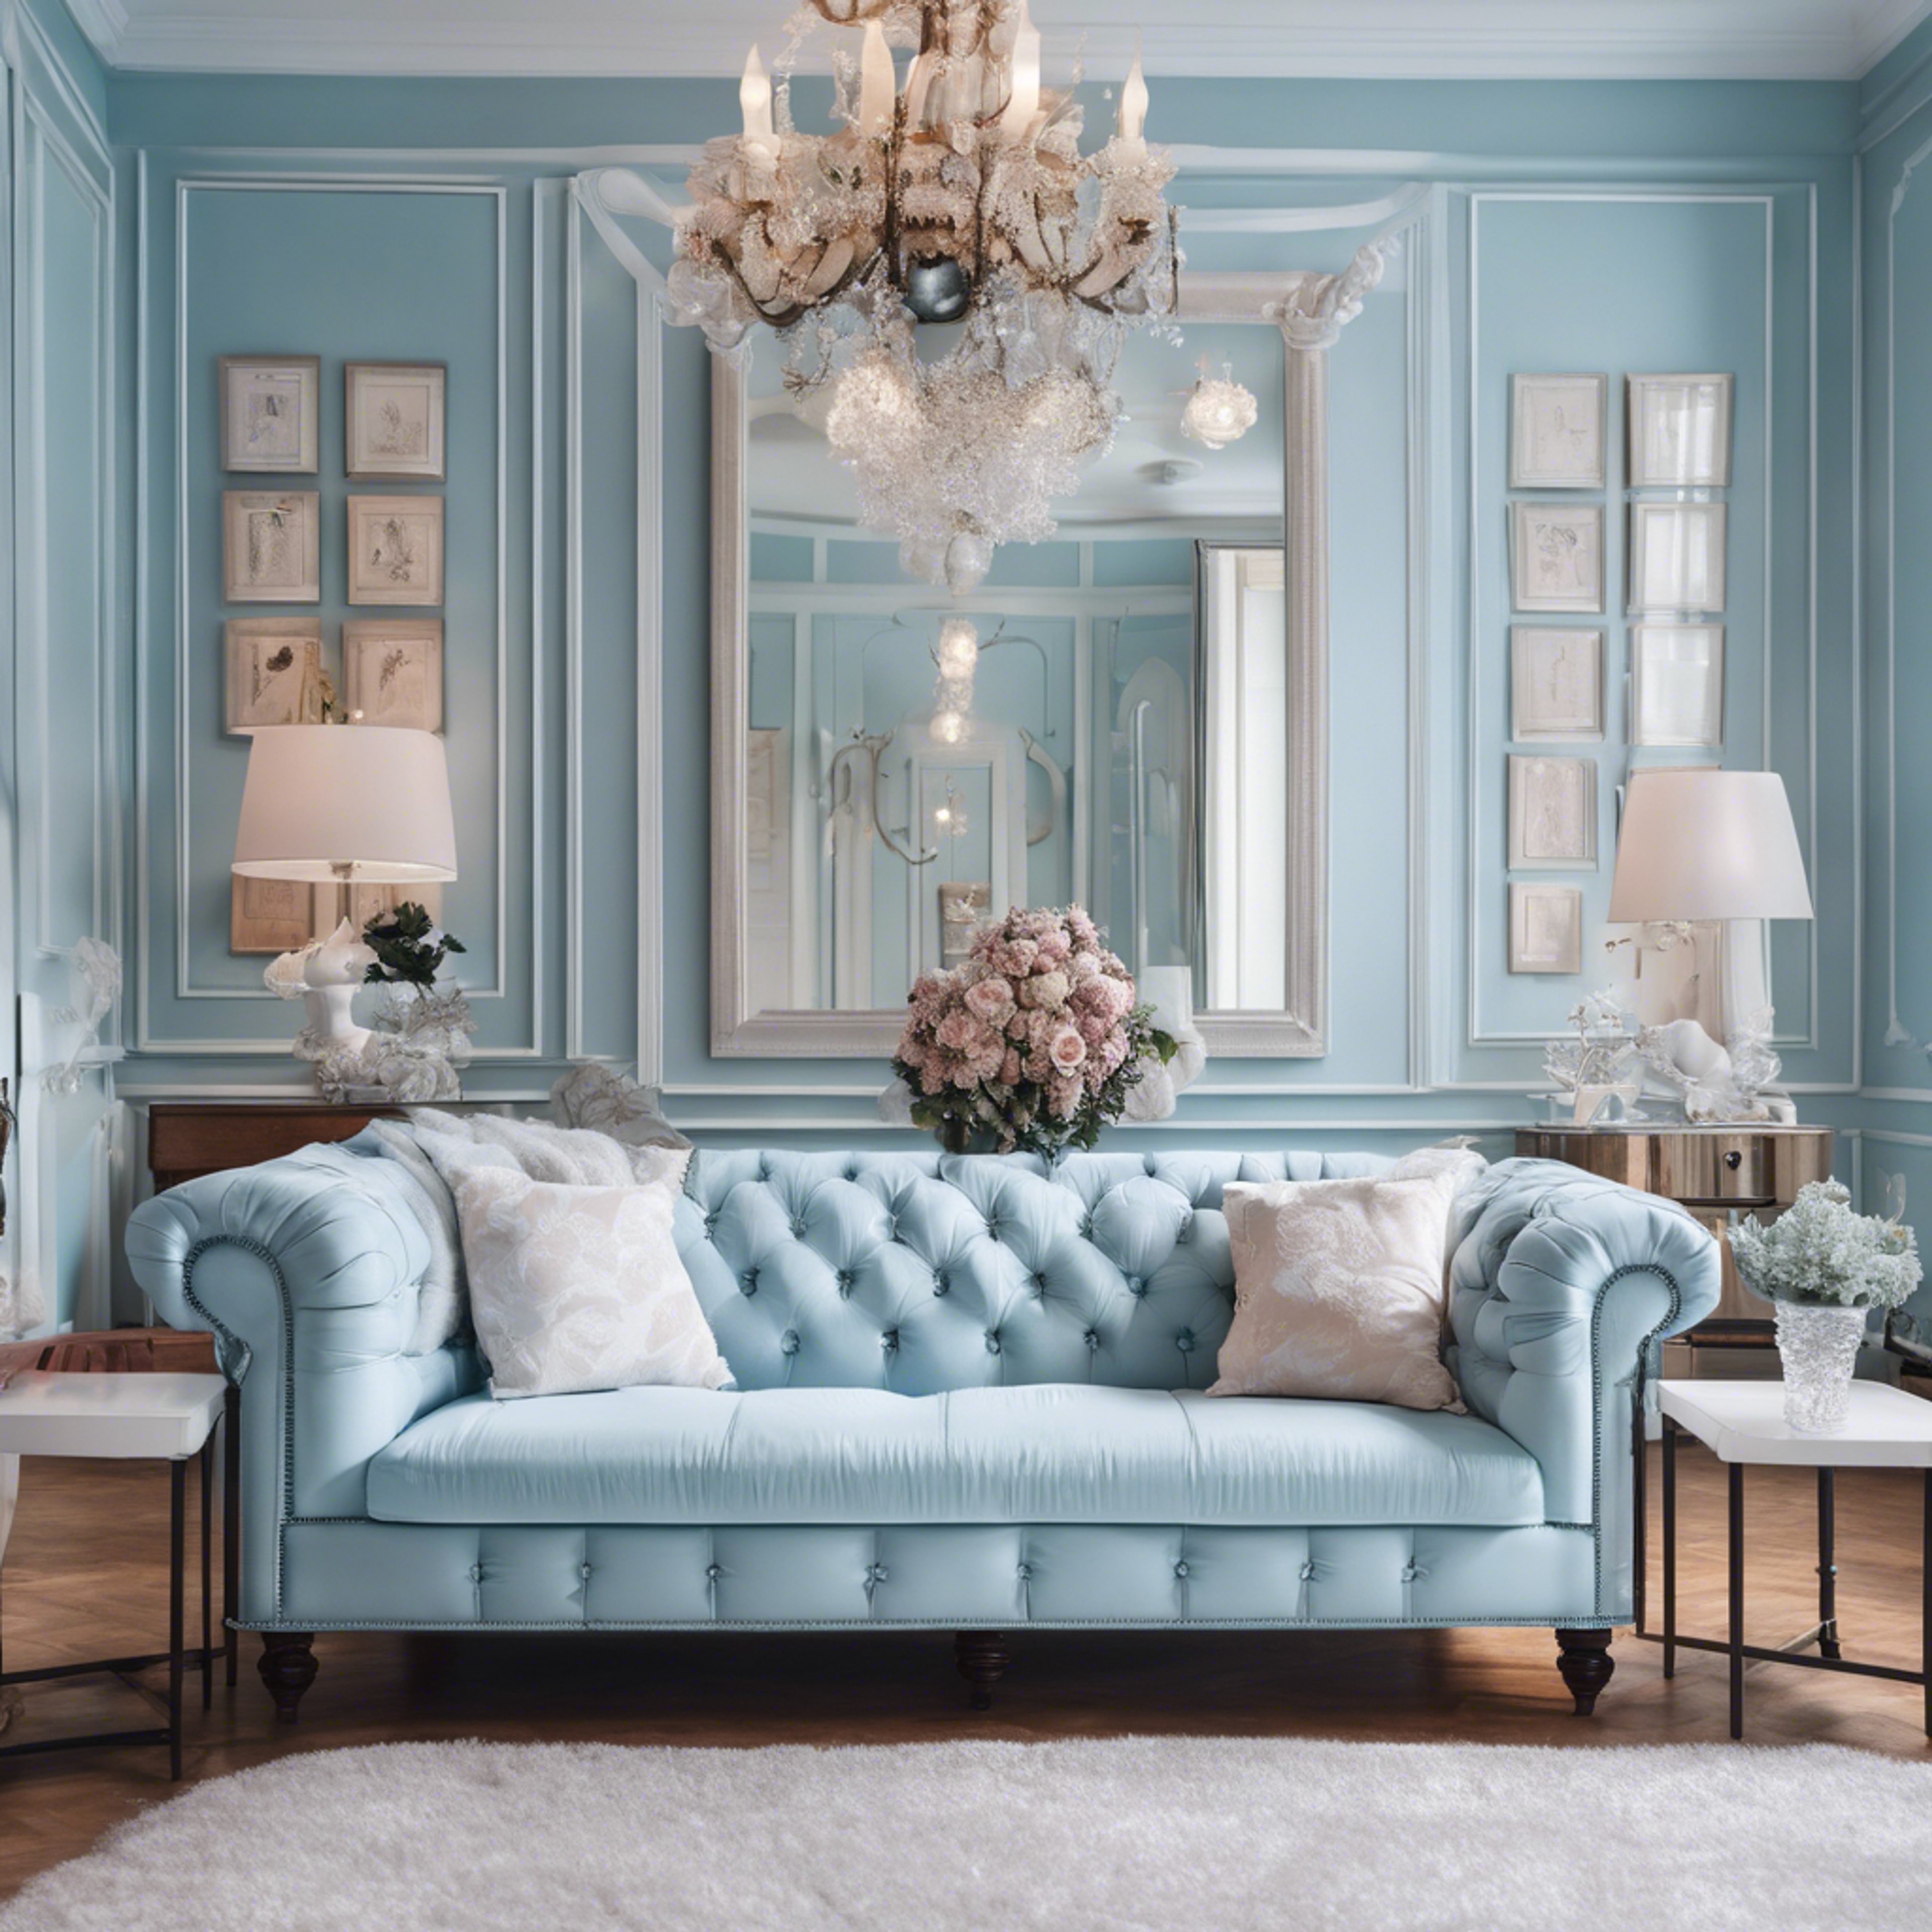 A preppy styled room with pastel blue wallpaper, Chesterfield sofa, and white French style furniture.” Tapeta[3904fac215ba4f1eaa62]